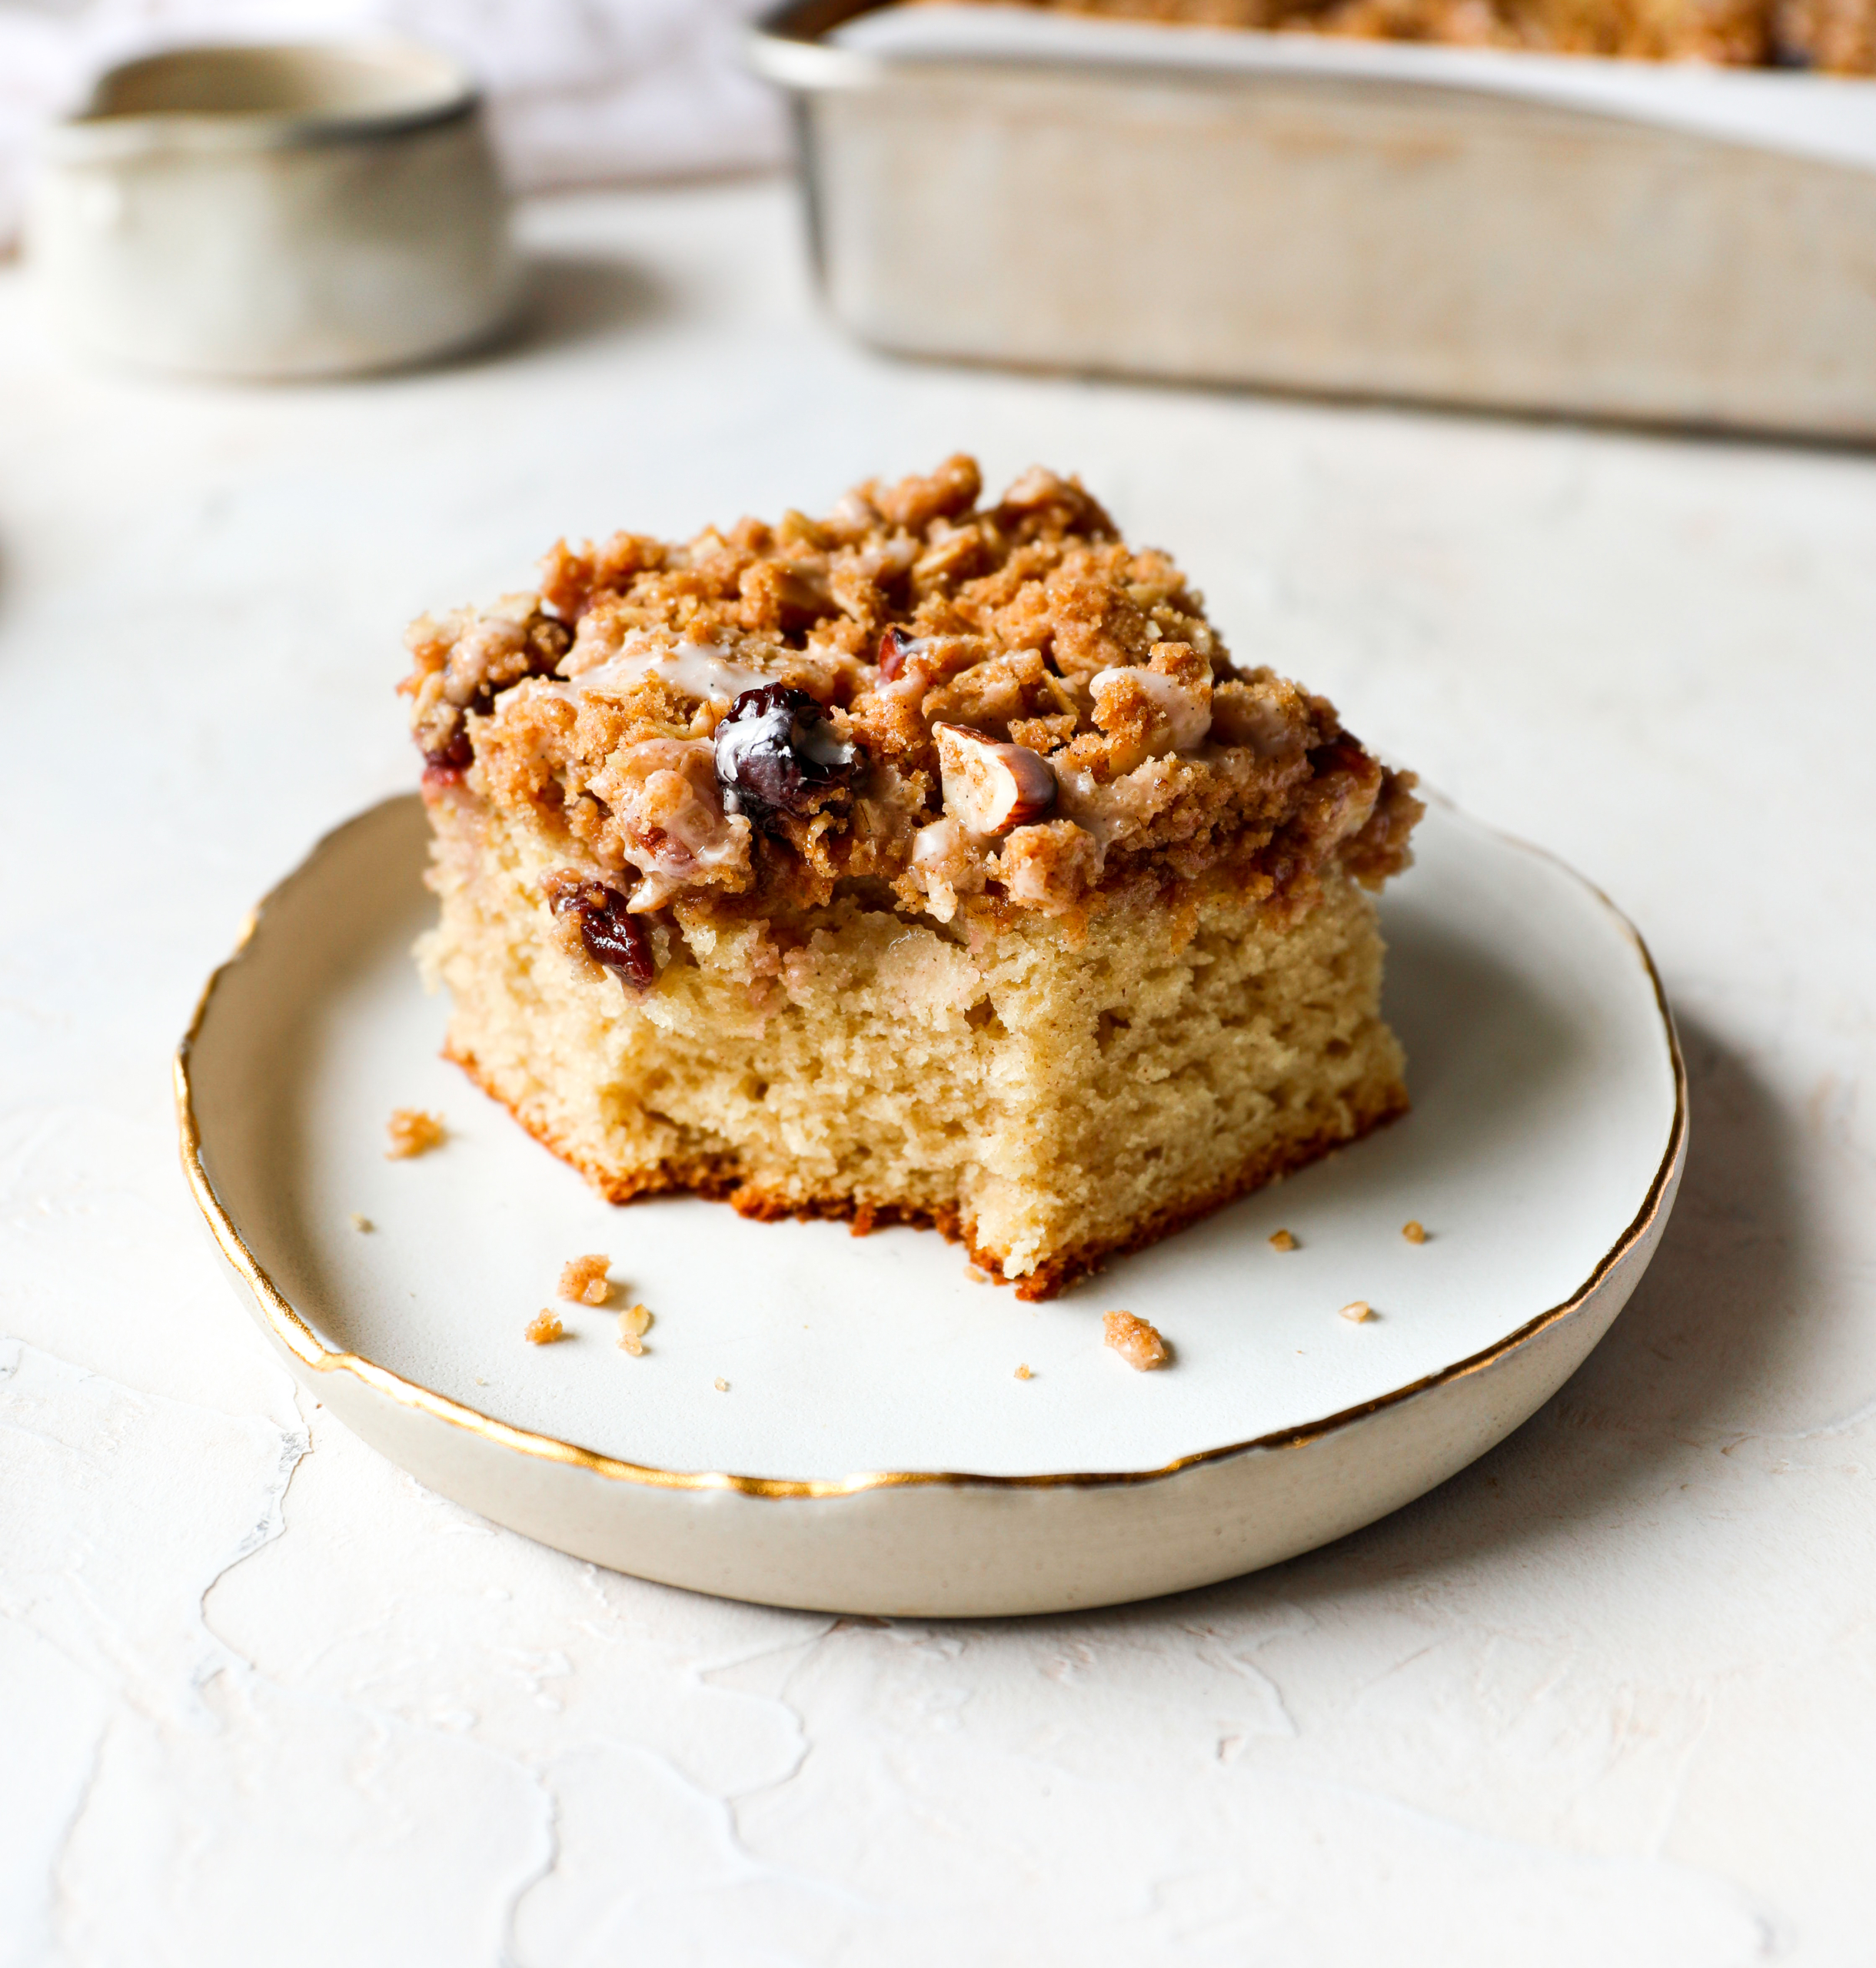 A piece of coffee cake with a bite out of it.